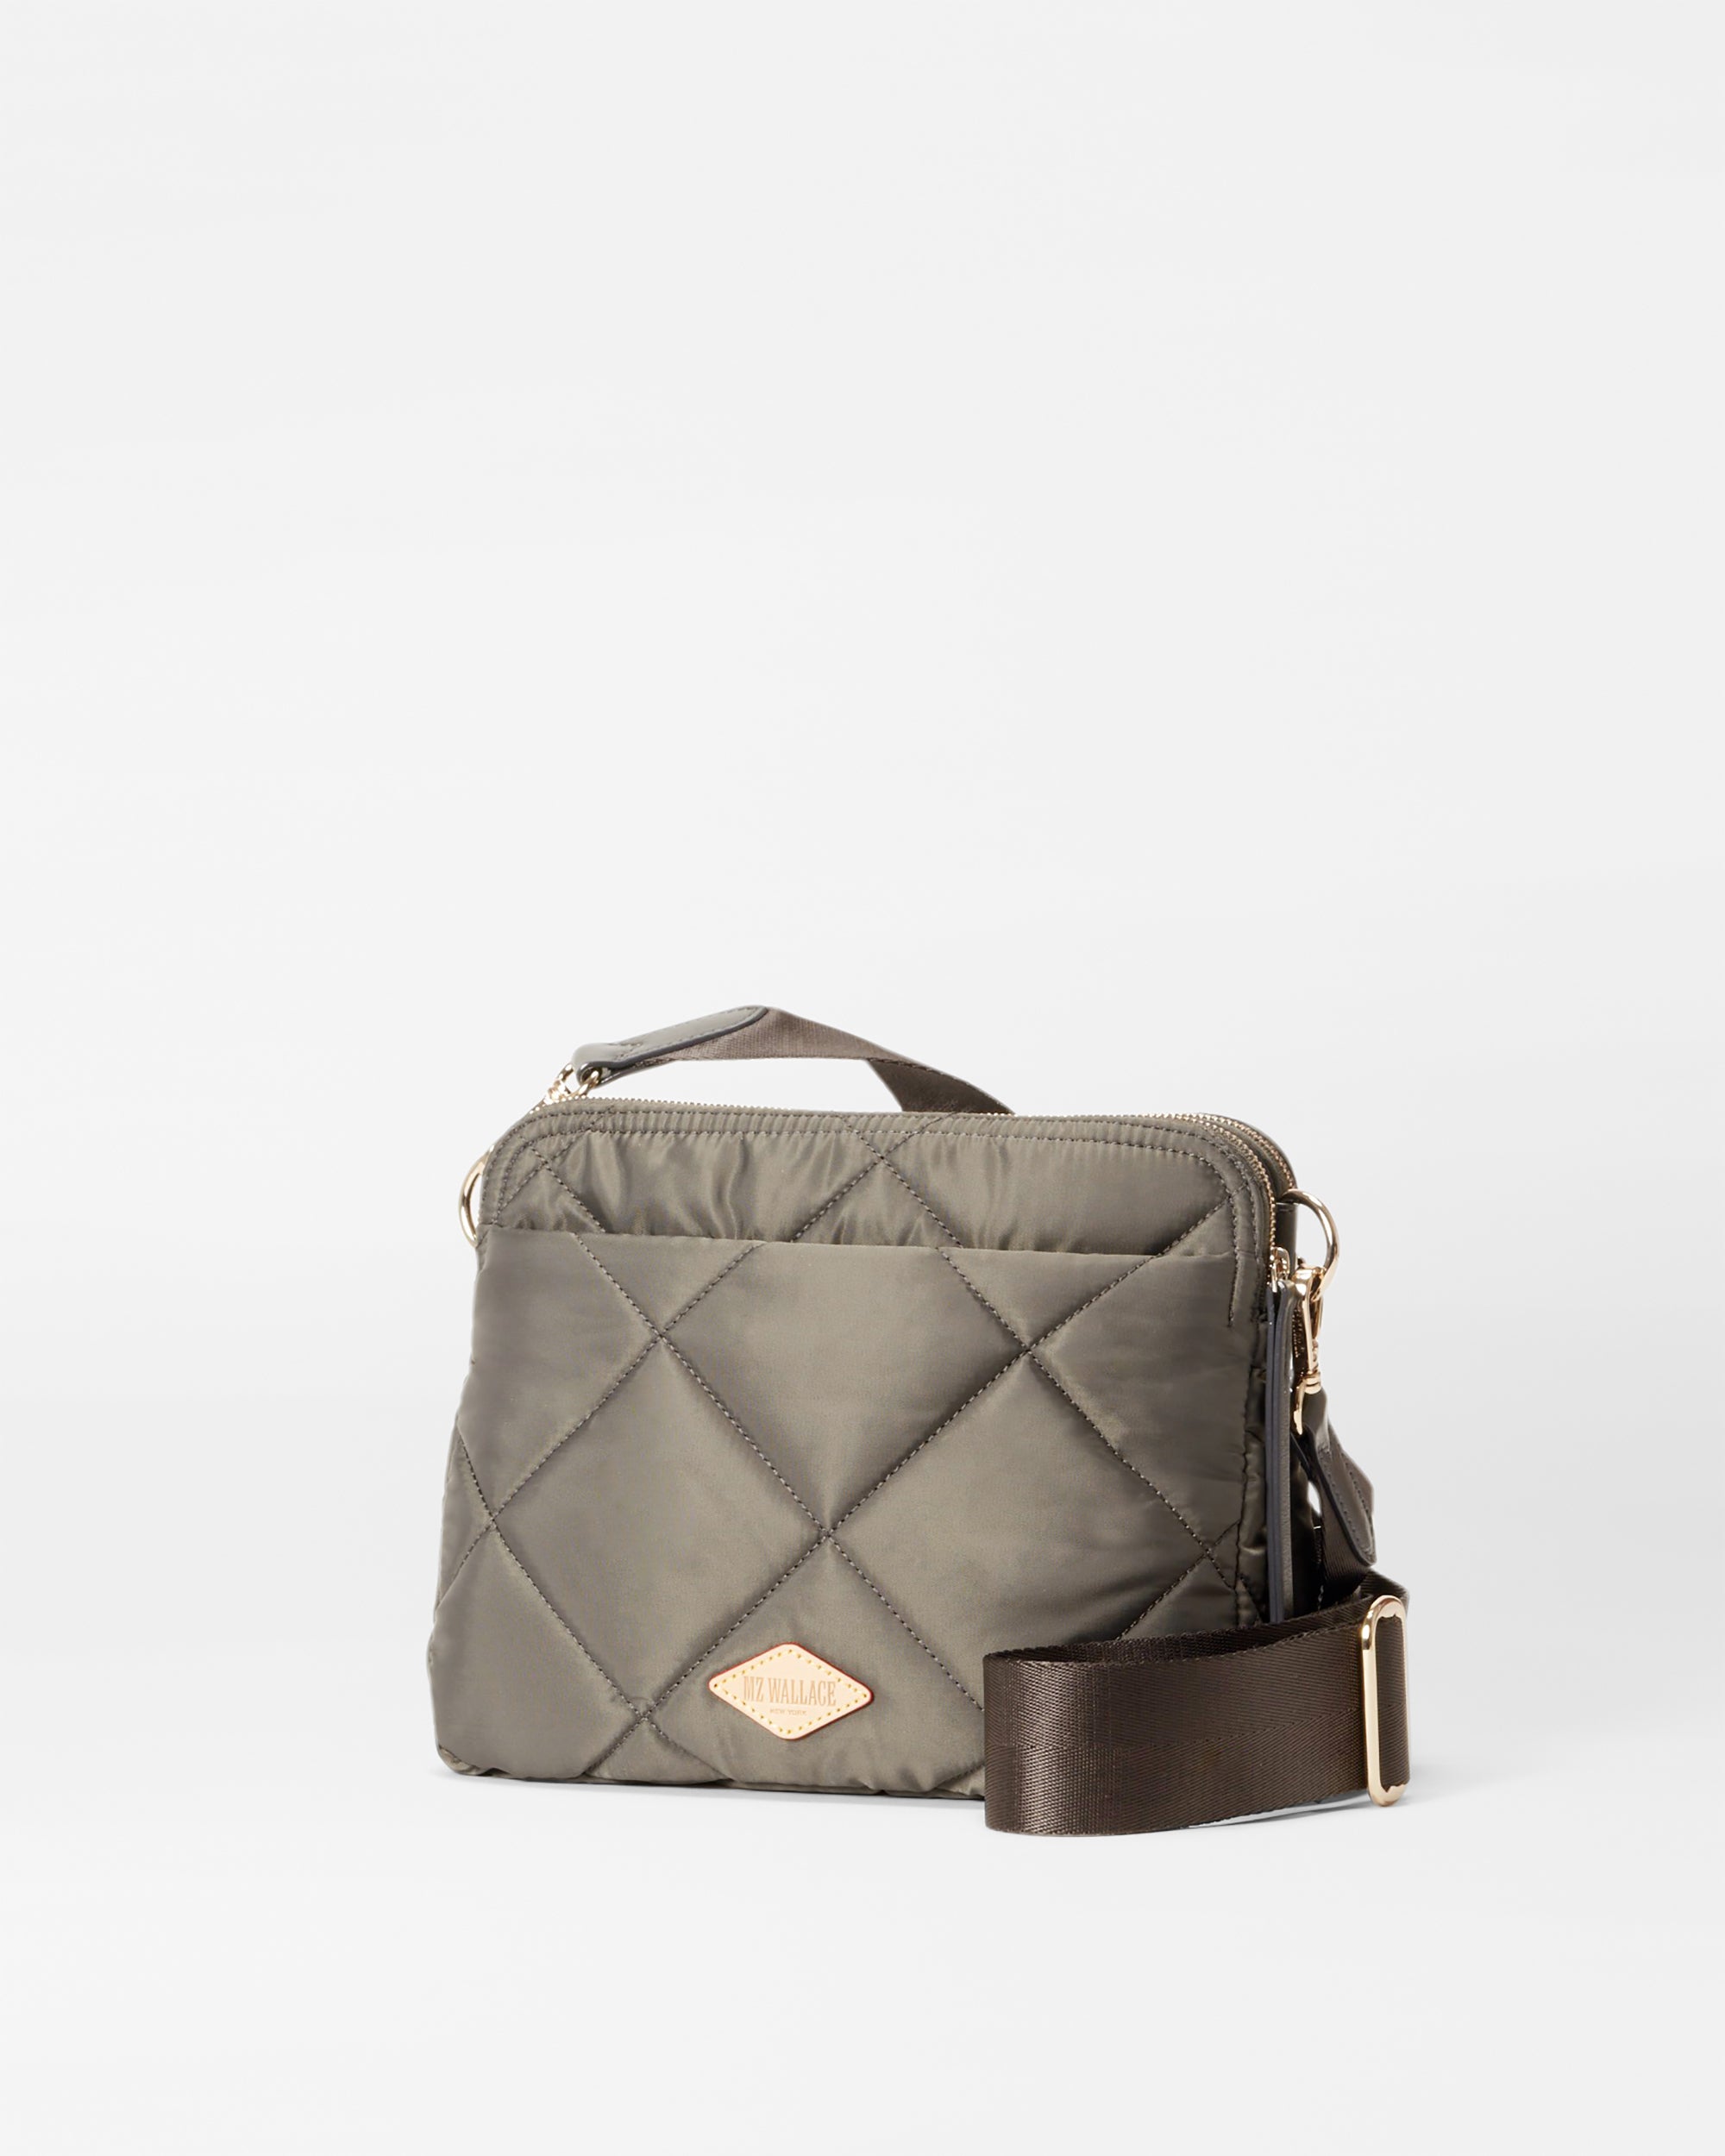 MZ Wallace Black Quilted Madison Convertible Crossbody